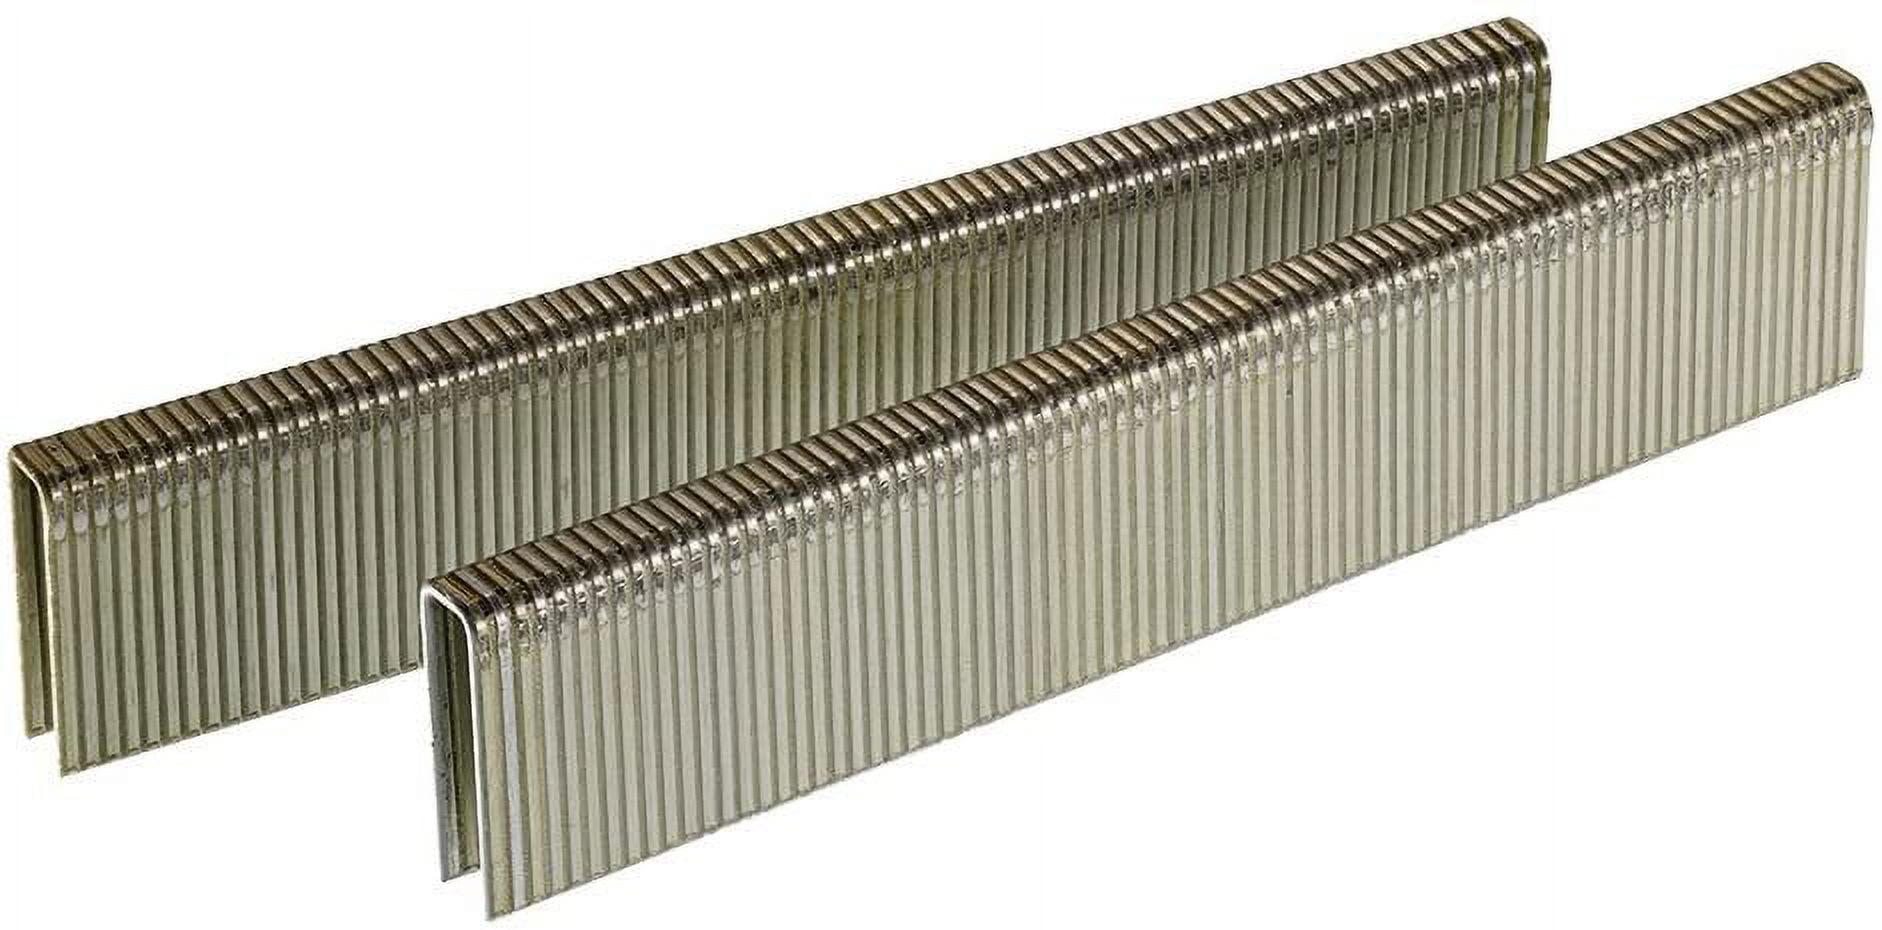 Senco L11BAB 18 Gauge by 1/4-inch Crown by 3/4-inch Leg Electro Galvanized Staples 5,000 per box - image 1 of 2